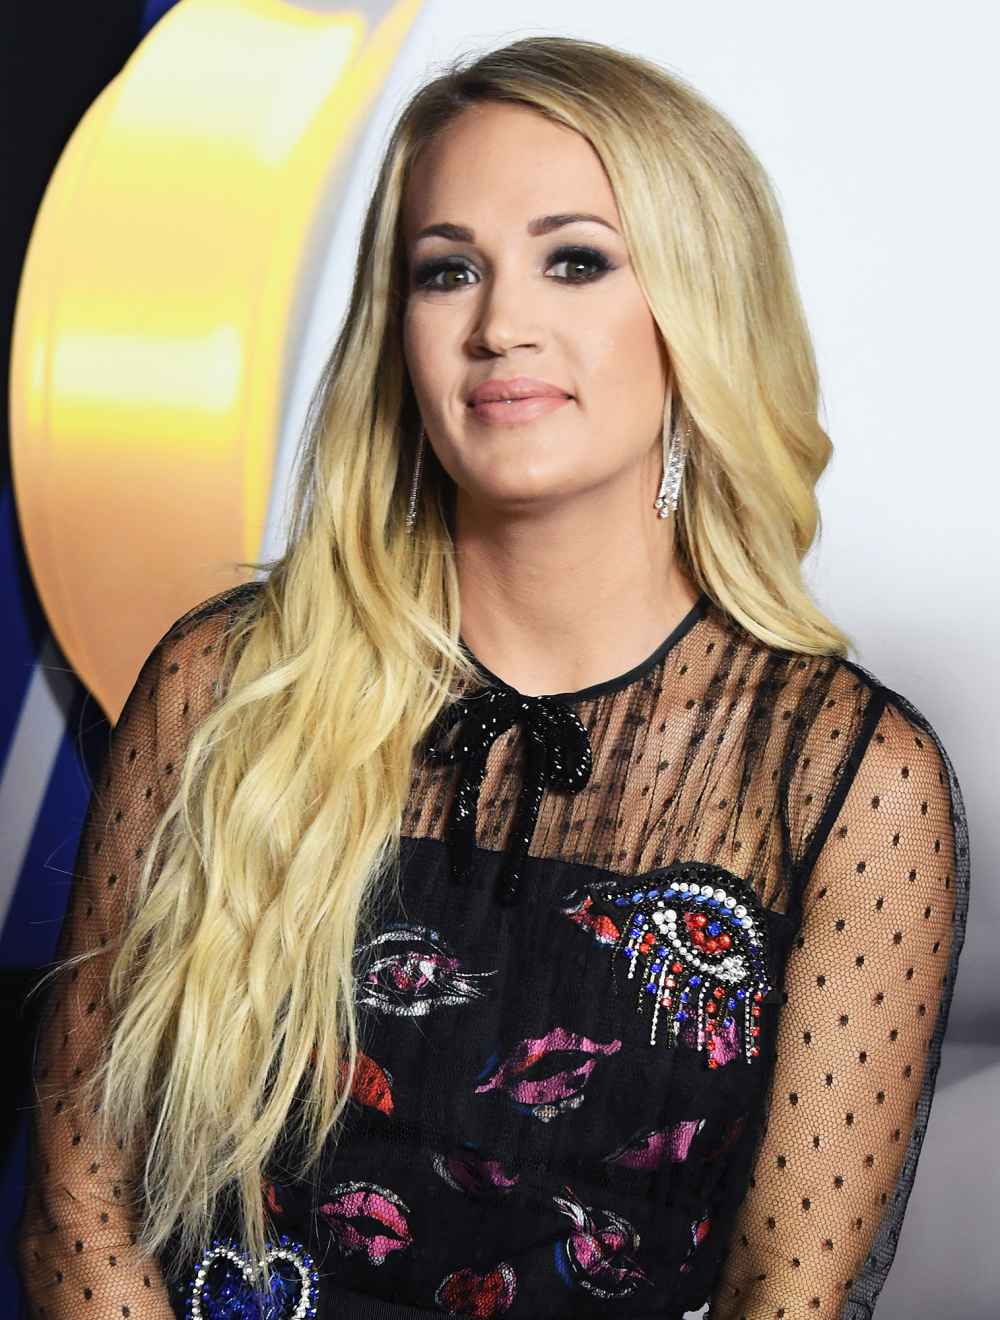 Carrie Underwood Laments Gym Difficulties: After Baby No. 2, ‘My Body Has Not Belonged to Me’